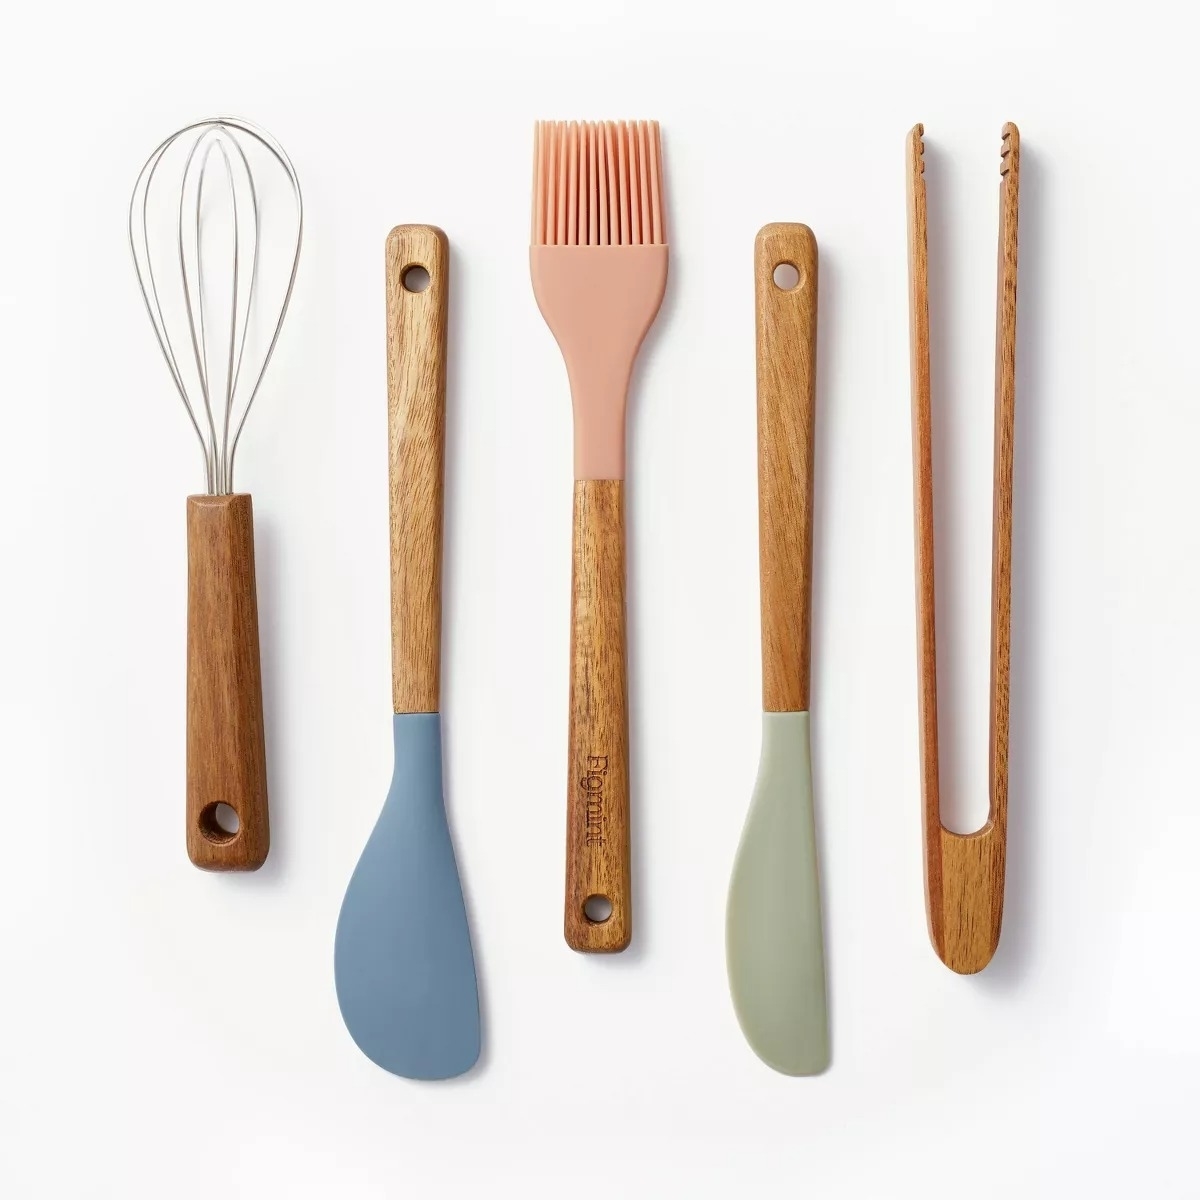 Wooden-handled kitchen utensils including a whisk, spatula, basting brush, and tongs